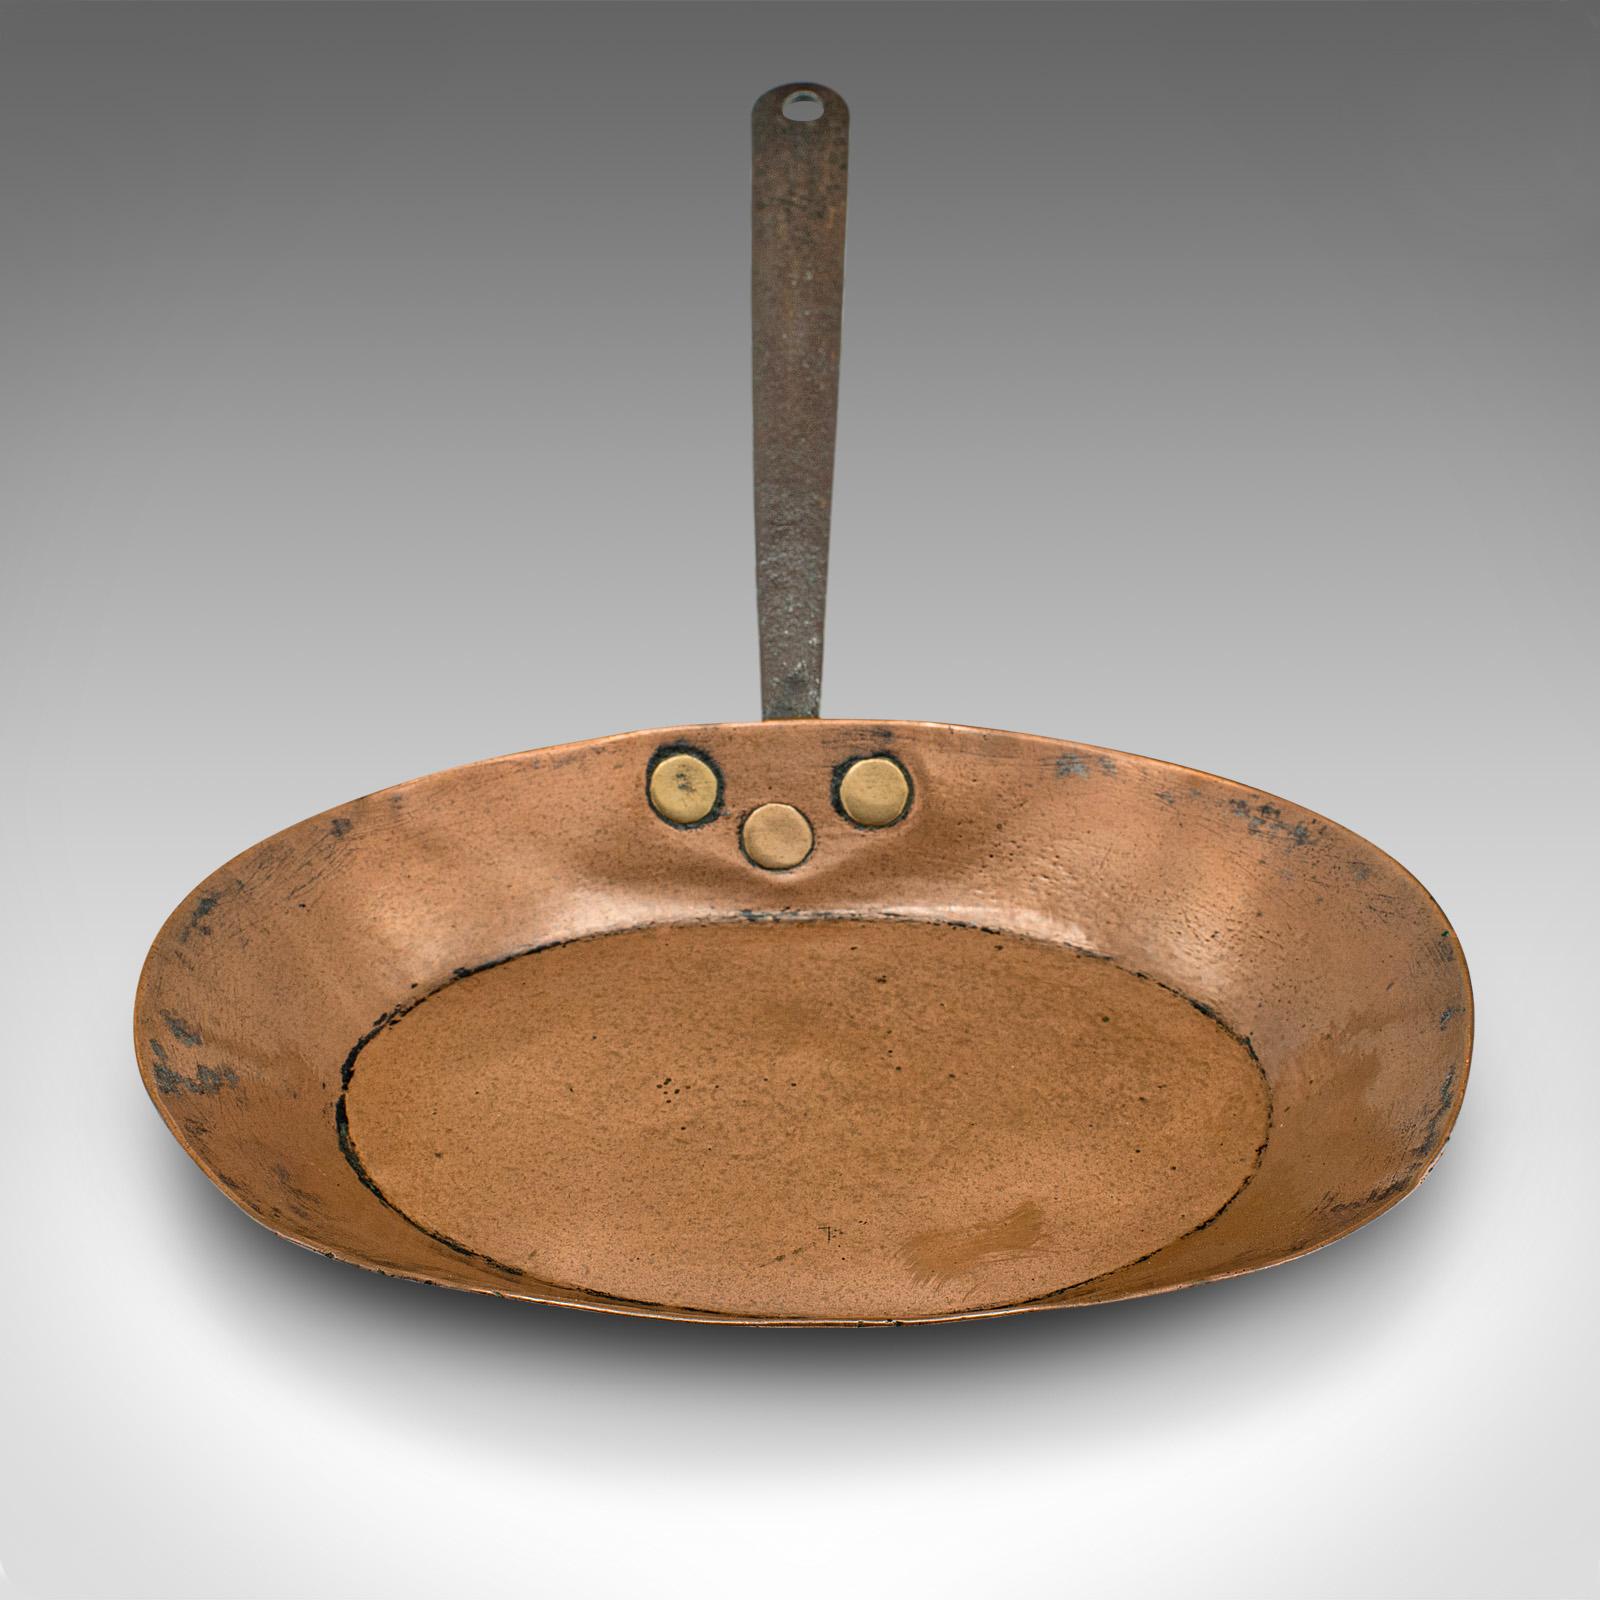 This is an antique fireside warming pan. An English, copper and iron decorative piece, dating to the early Georgian period, circa 1750.

Whilst used in period, the unlined nature of this copper pan is suitable for display use only.

Wonderful